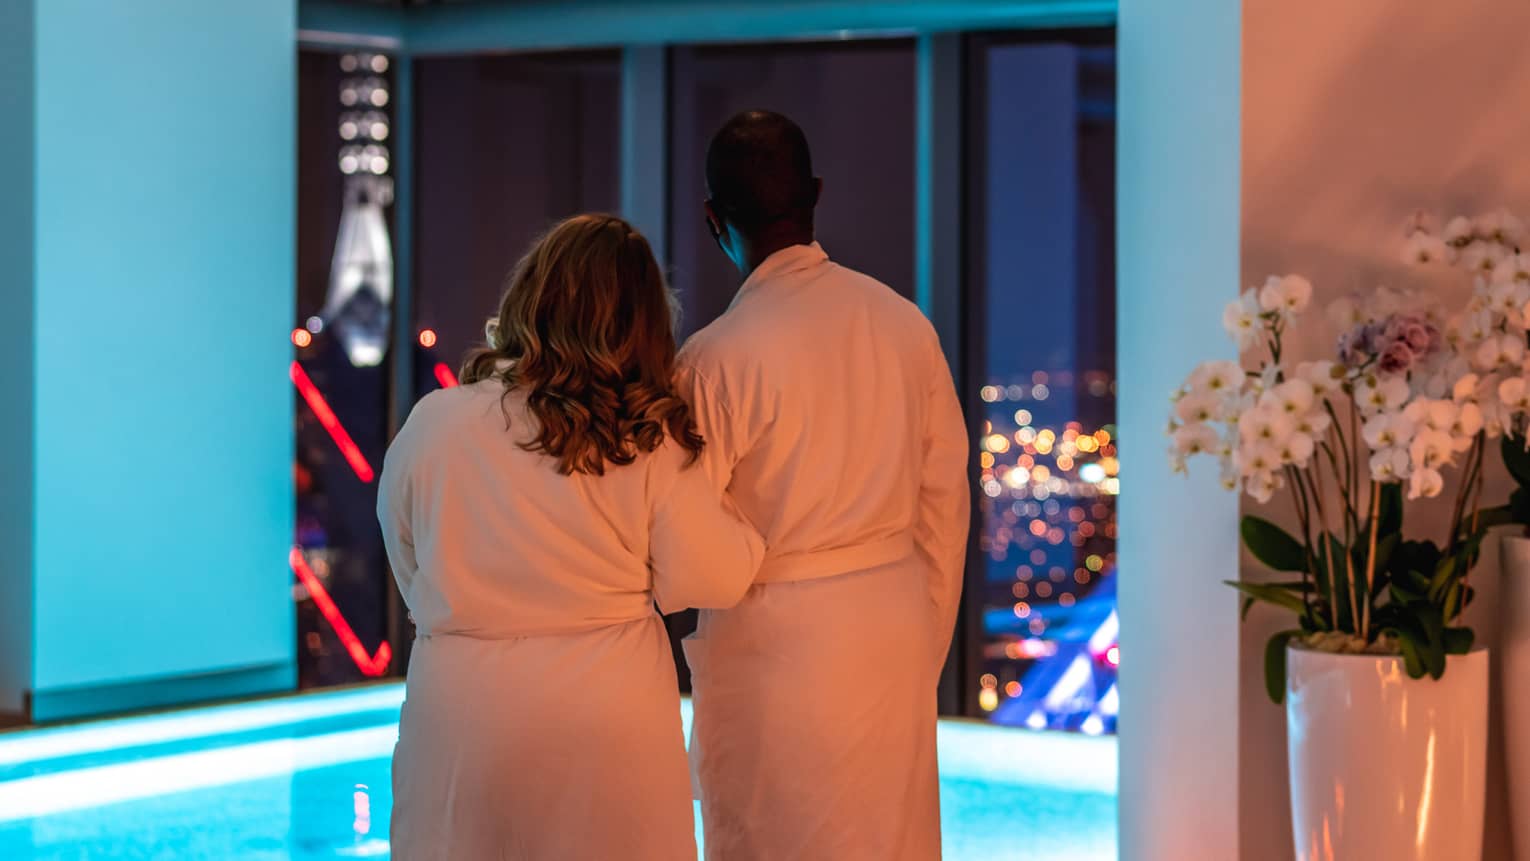 A man and woman in spa robes looking out a large window at a city during night.